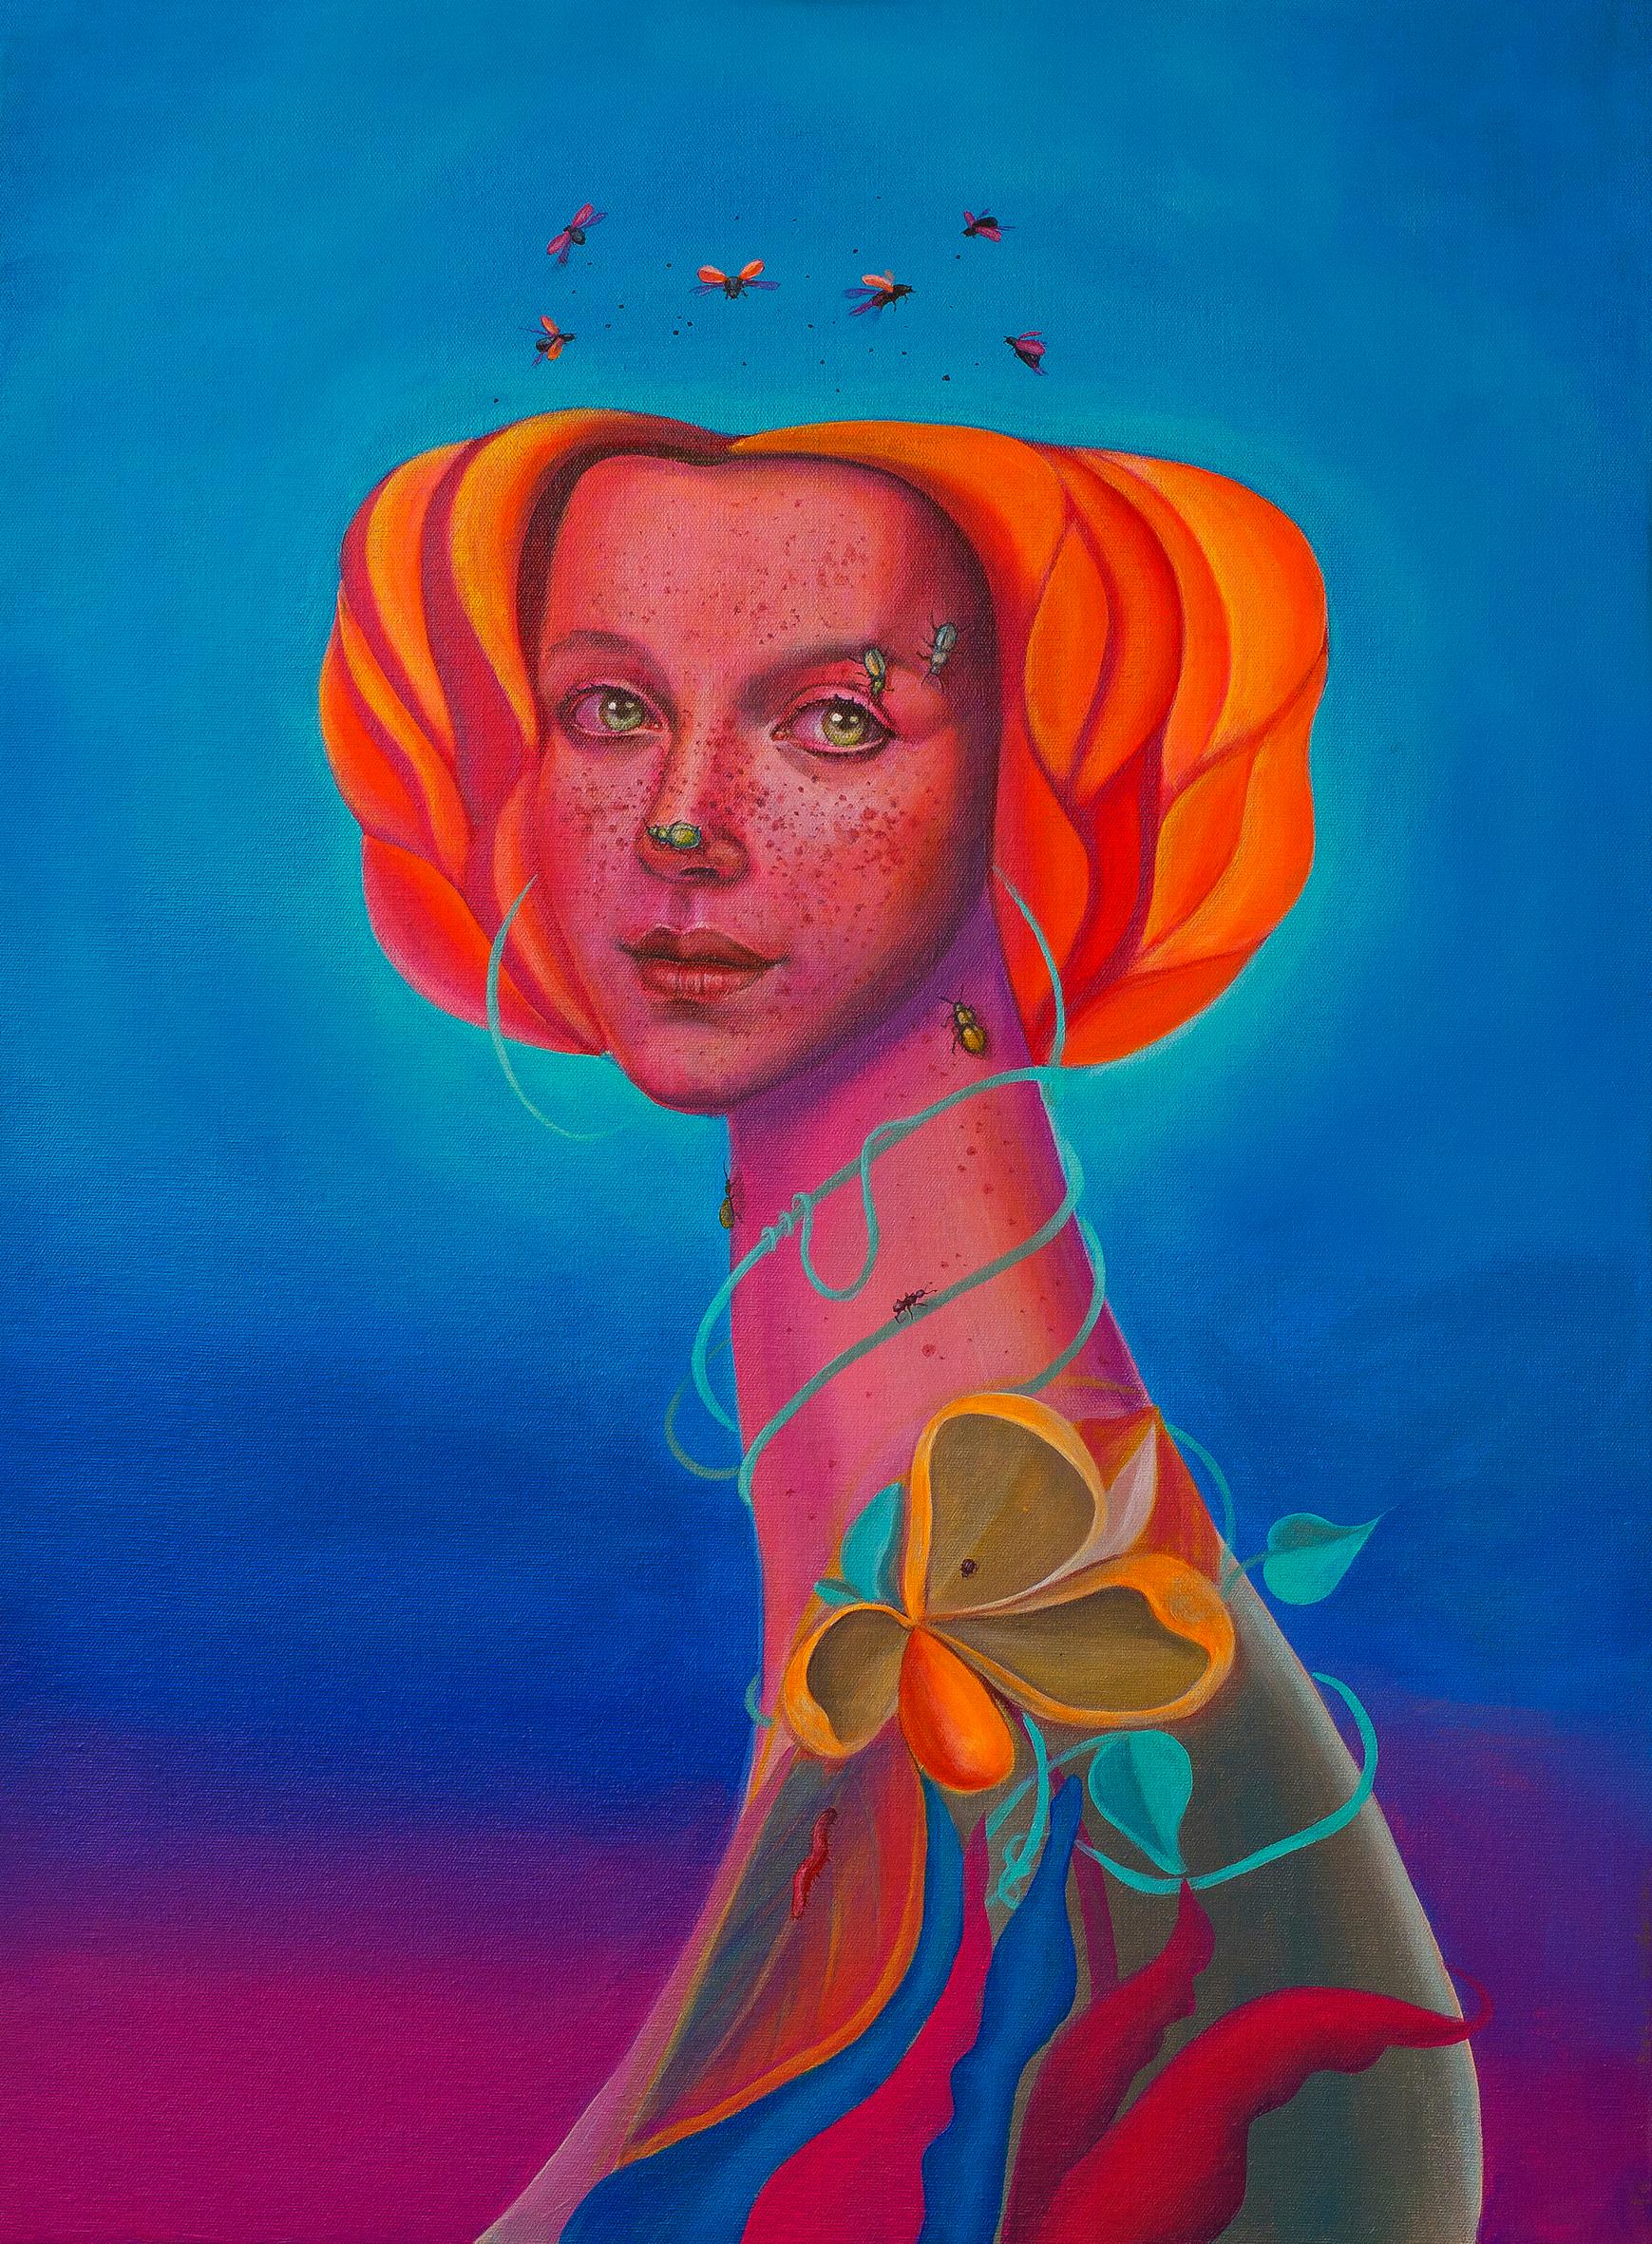 Natasha Lelenco Figurative Painting - Vibrant Colourfull Contemporary Pop Surrealist Portrait With Insects And Flowers